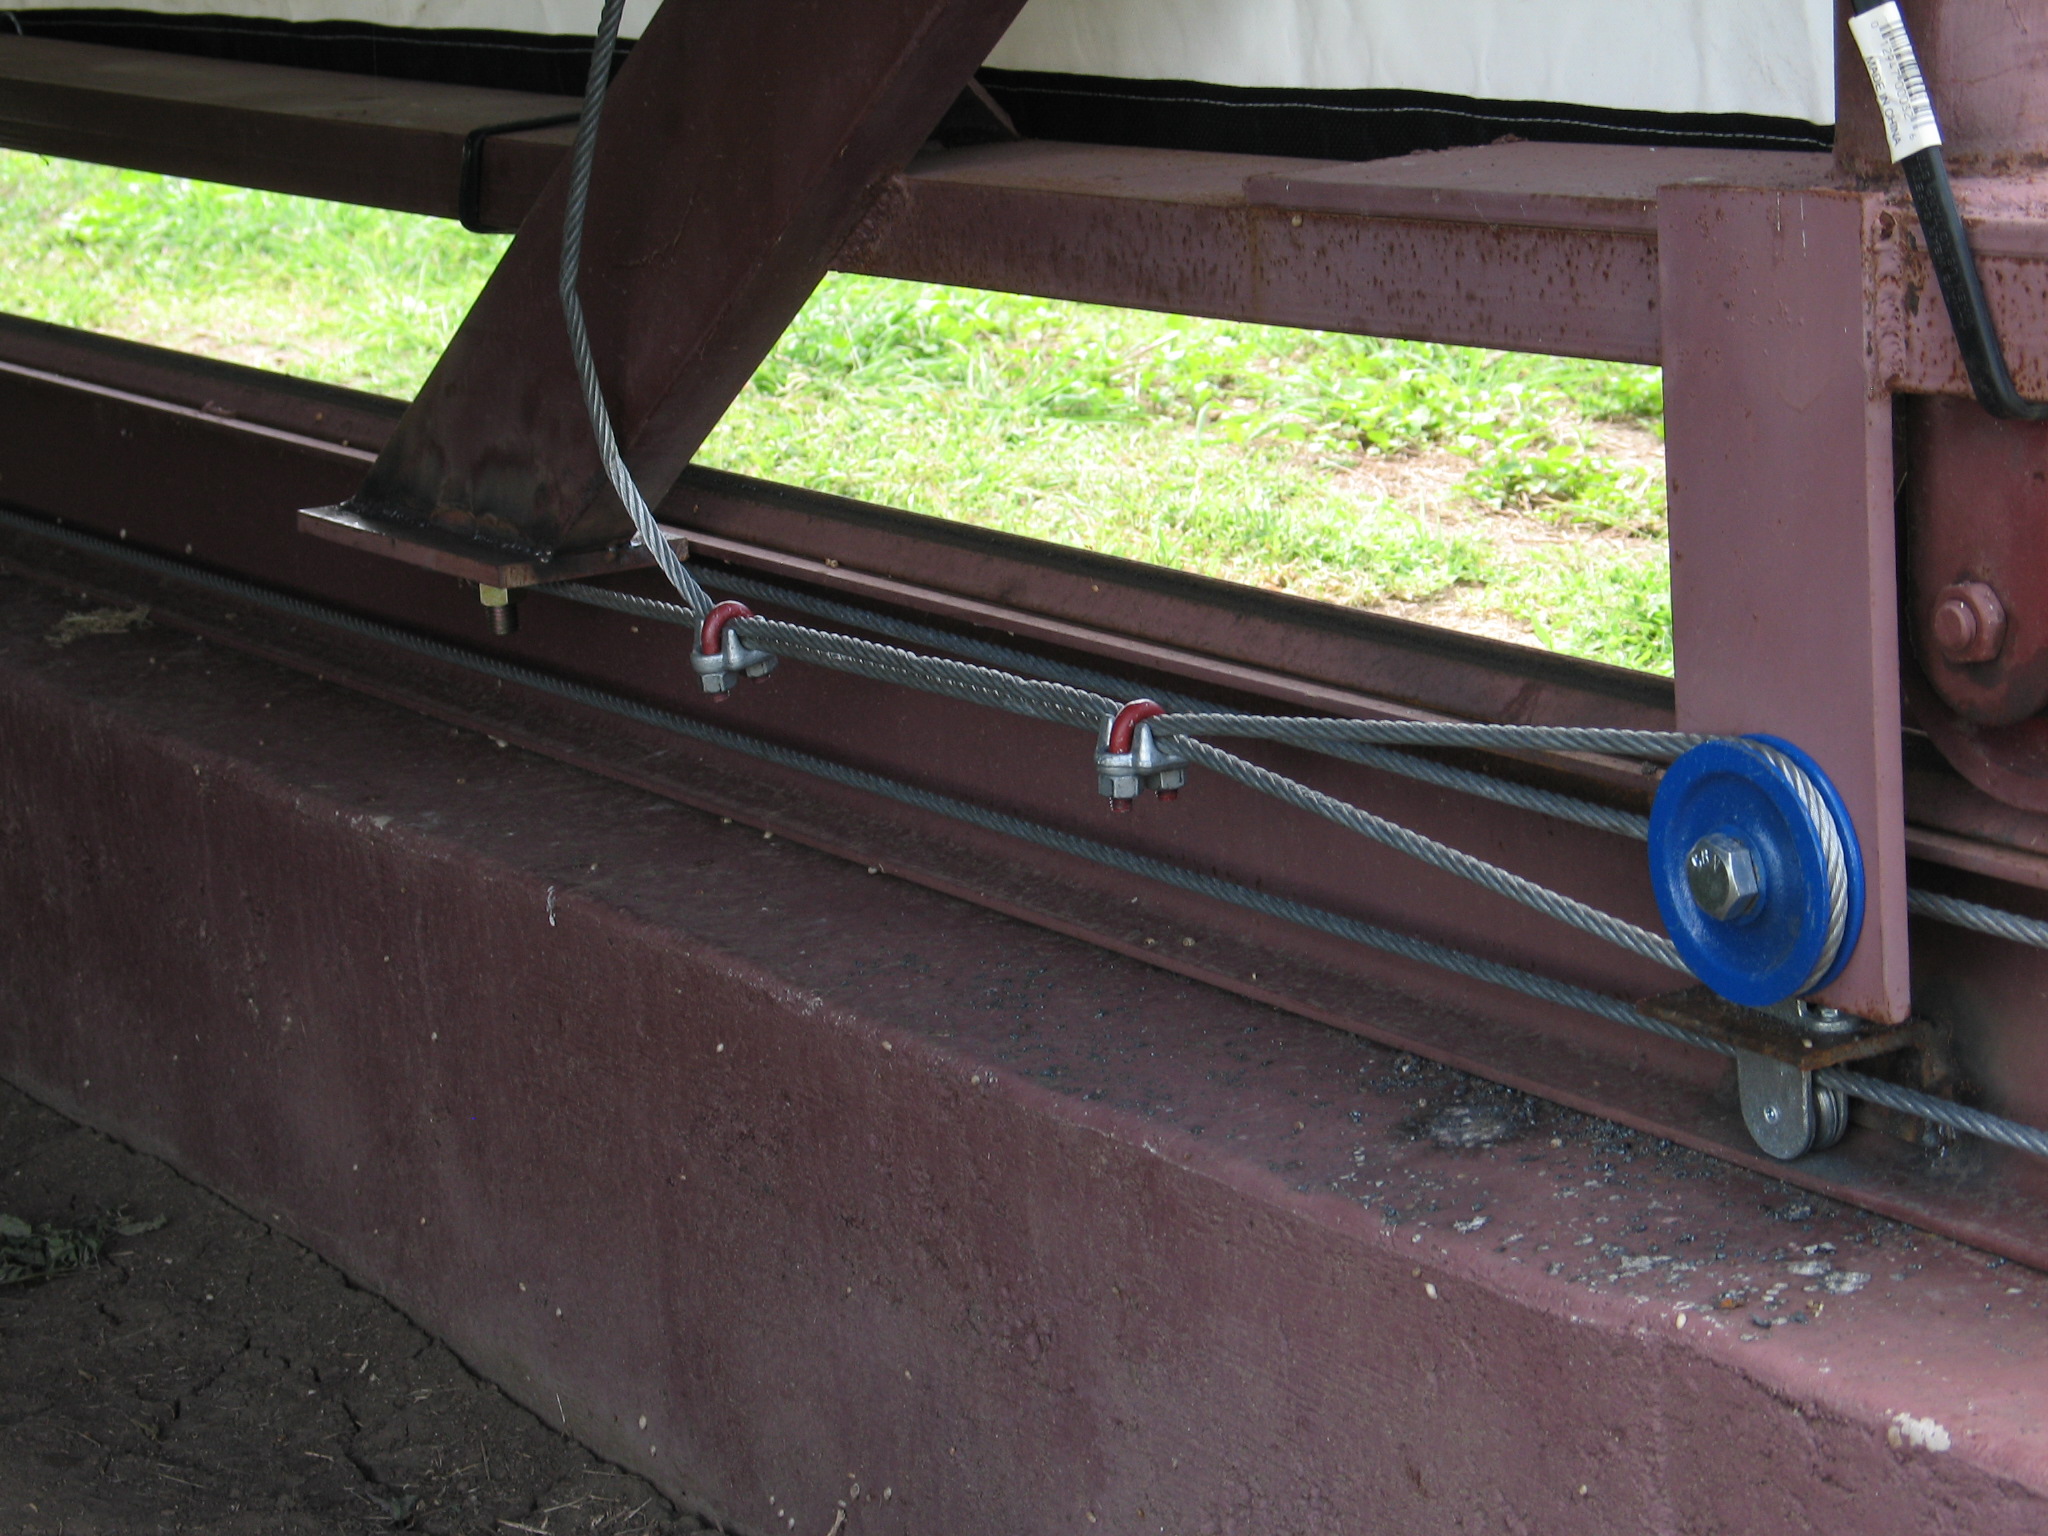 This slideshow presents the rainout shelter's components, such as the rail and wheels, structure, cables, and rain meter.